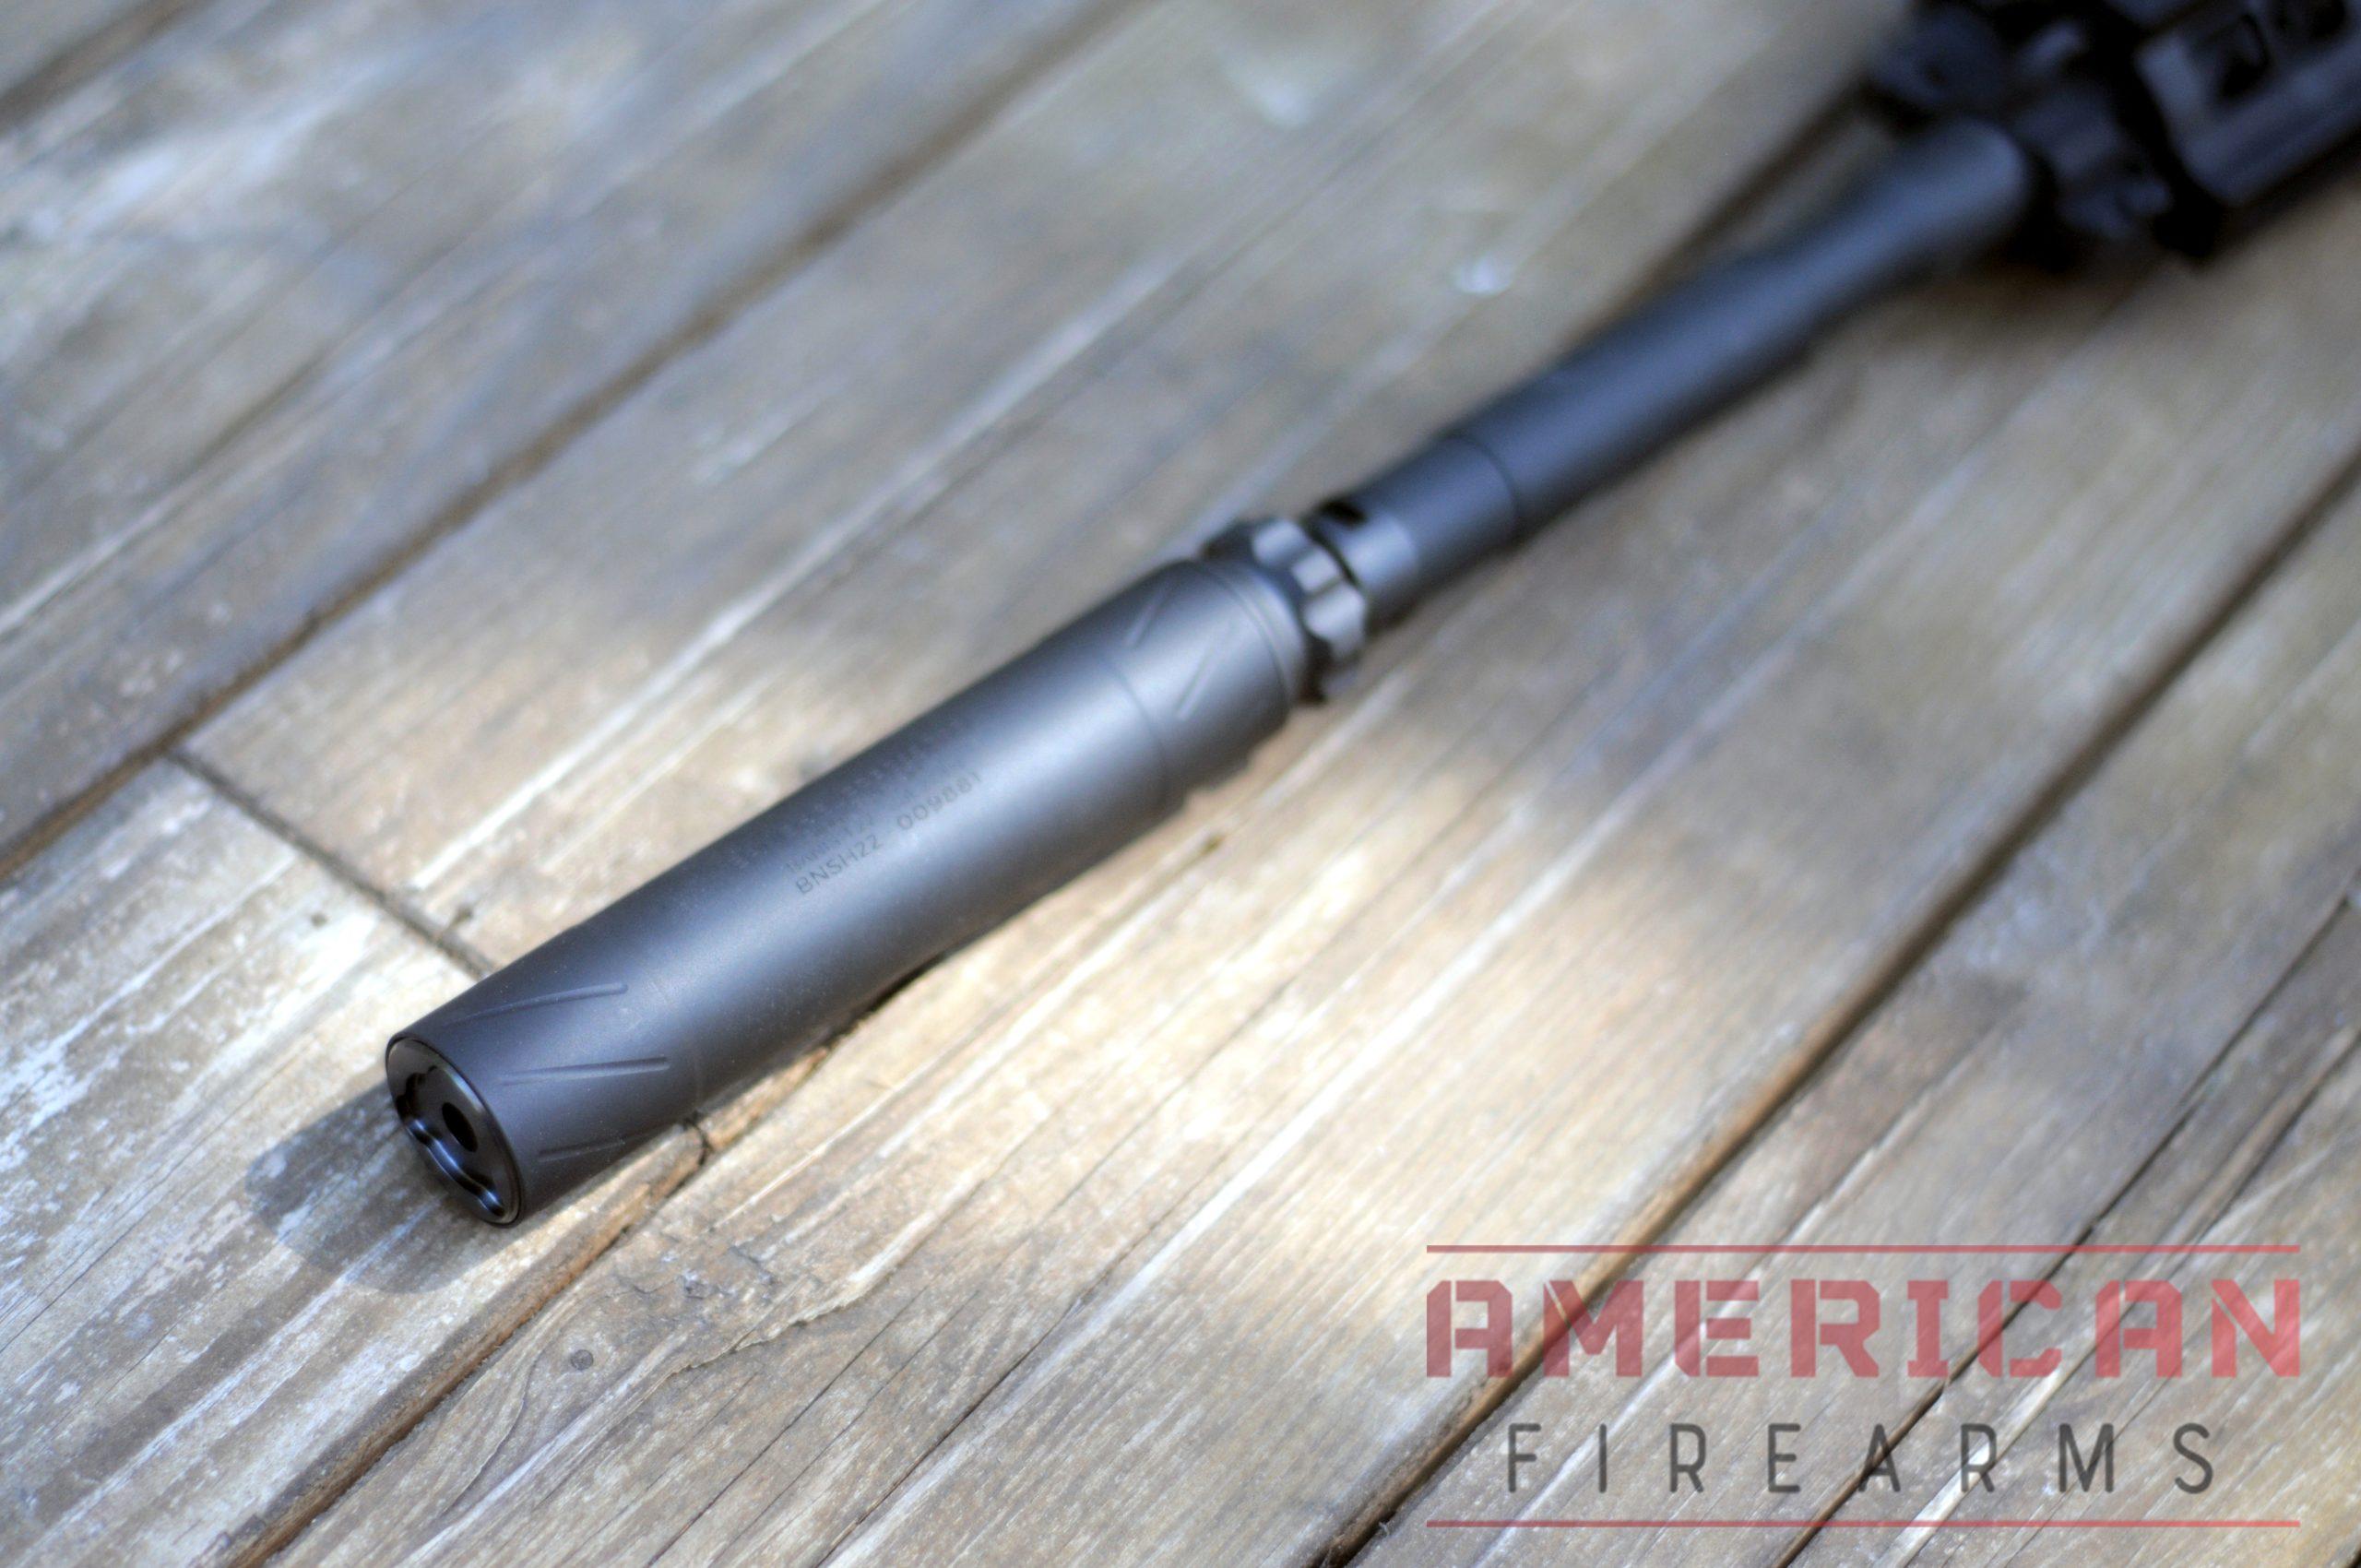 The Banish 22 is barely larger than a rifle barrel.